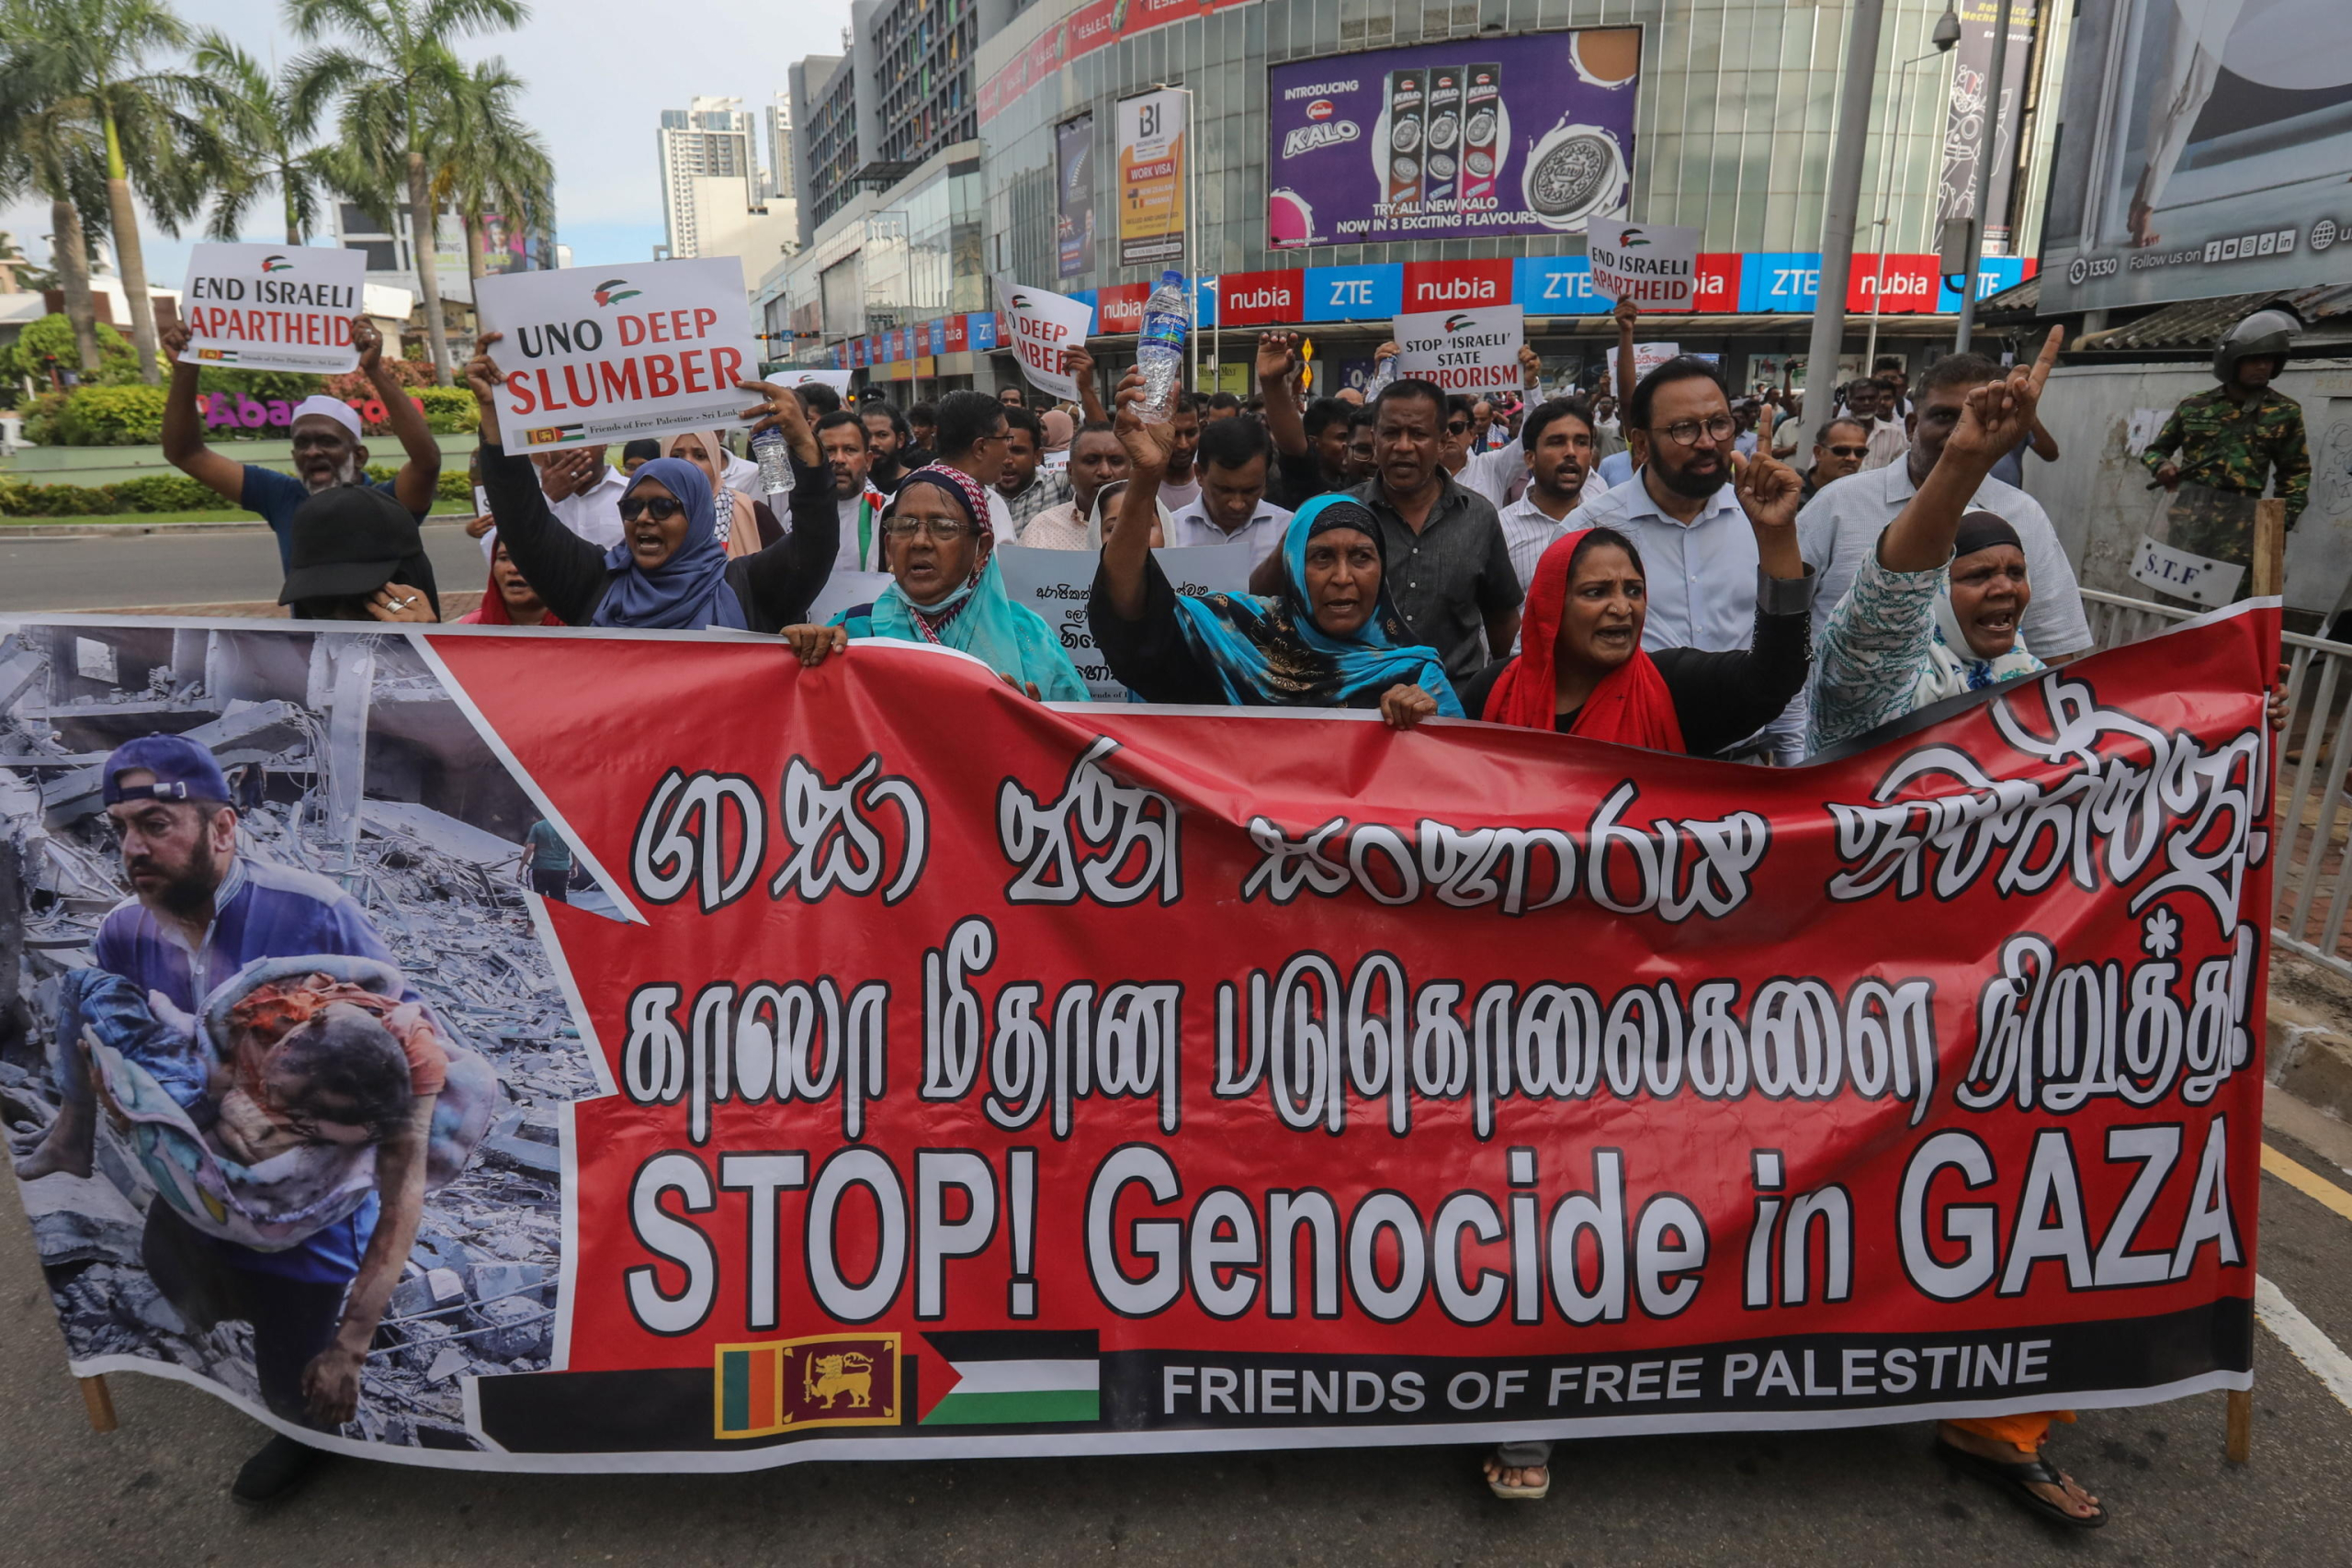 epa11337009 Sri Lankan pro-Palestinian civil rights activists hold placards and shout slogans during a solidarity protest to support the Palestinian people 'Free Gaza Free Palestine' in Colombo, Sri Lanka, 13 May 2023. Sri Lankan pro-Palestinian civil rights activists staged a solidarity protest in Colombo to support the Palestinian people and protest against the Israeli-Hamas conflict, demanding its immediate end and the affirmation of the right to life of the Palestinian people.  EPA/CHAMILA KARUNARATHNE 52283